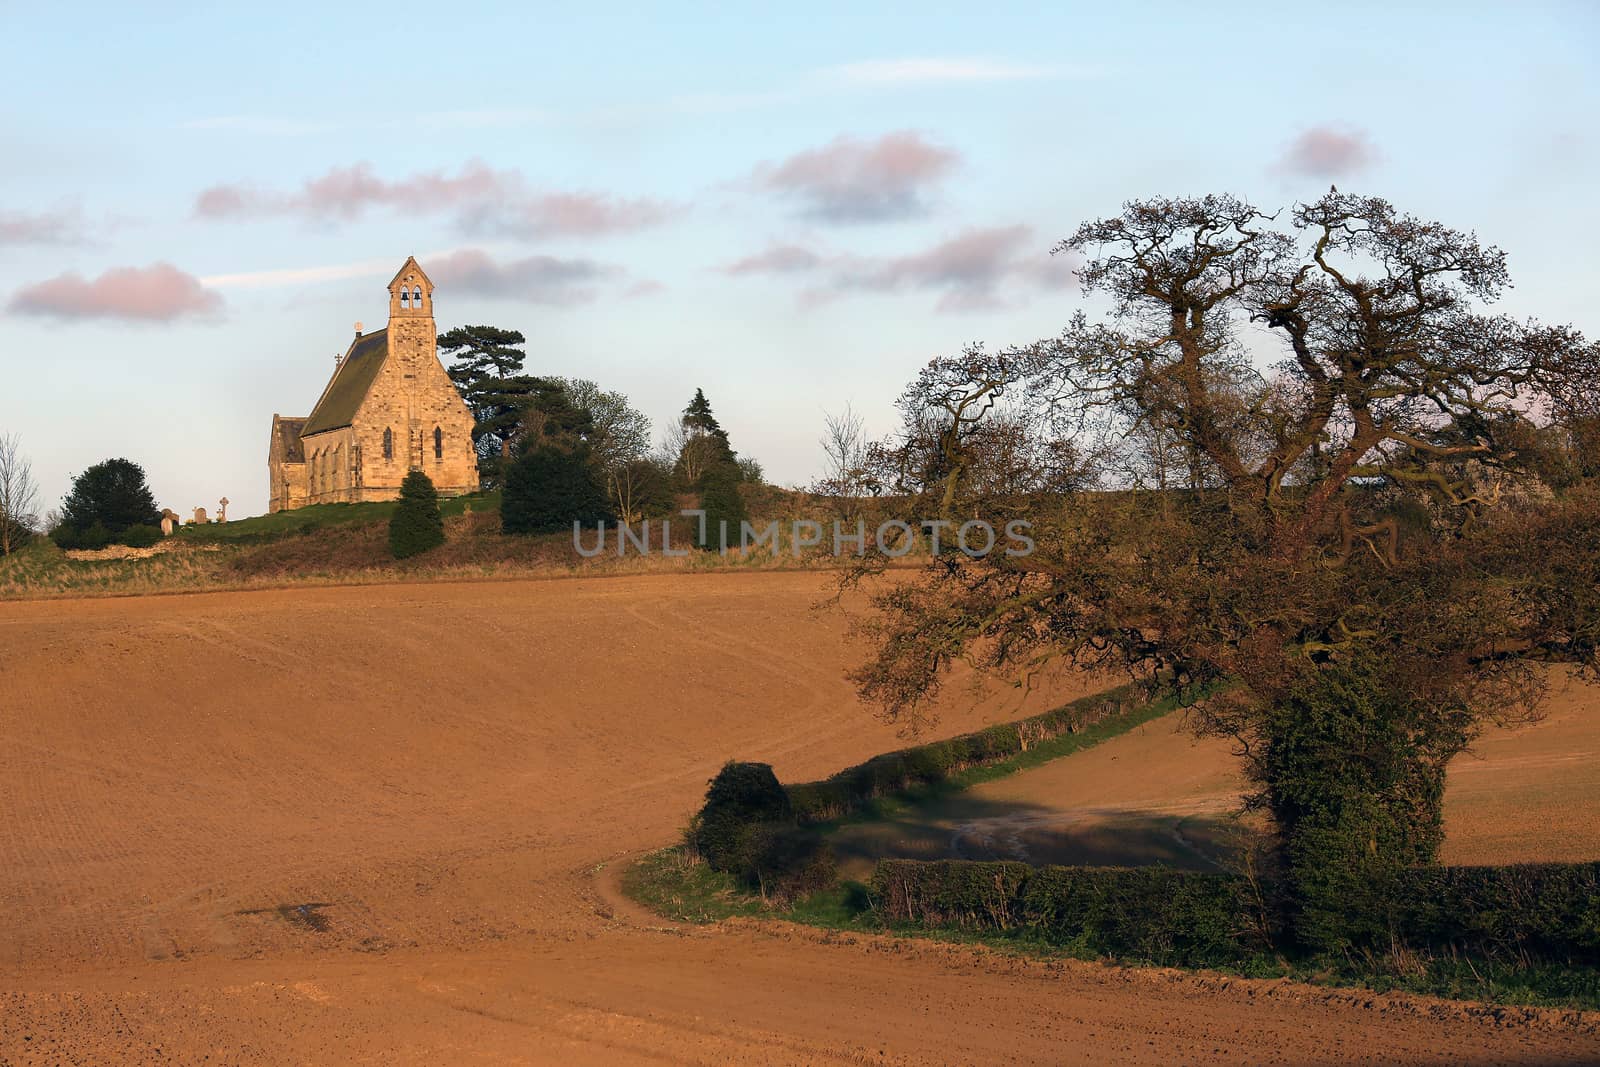 Late afternoon sun on an English Parish Church near the village of Leavening in the countryside of North Yorkshire in northeast England.